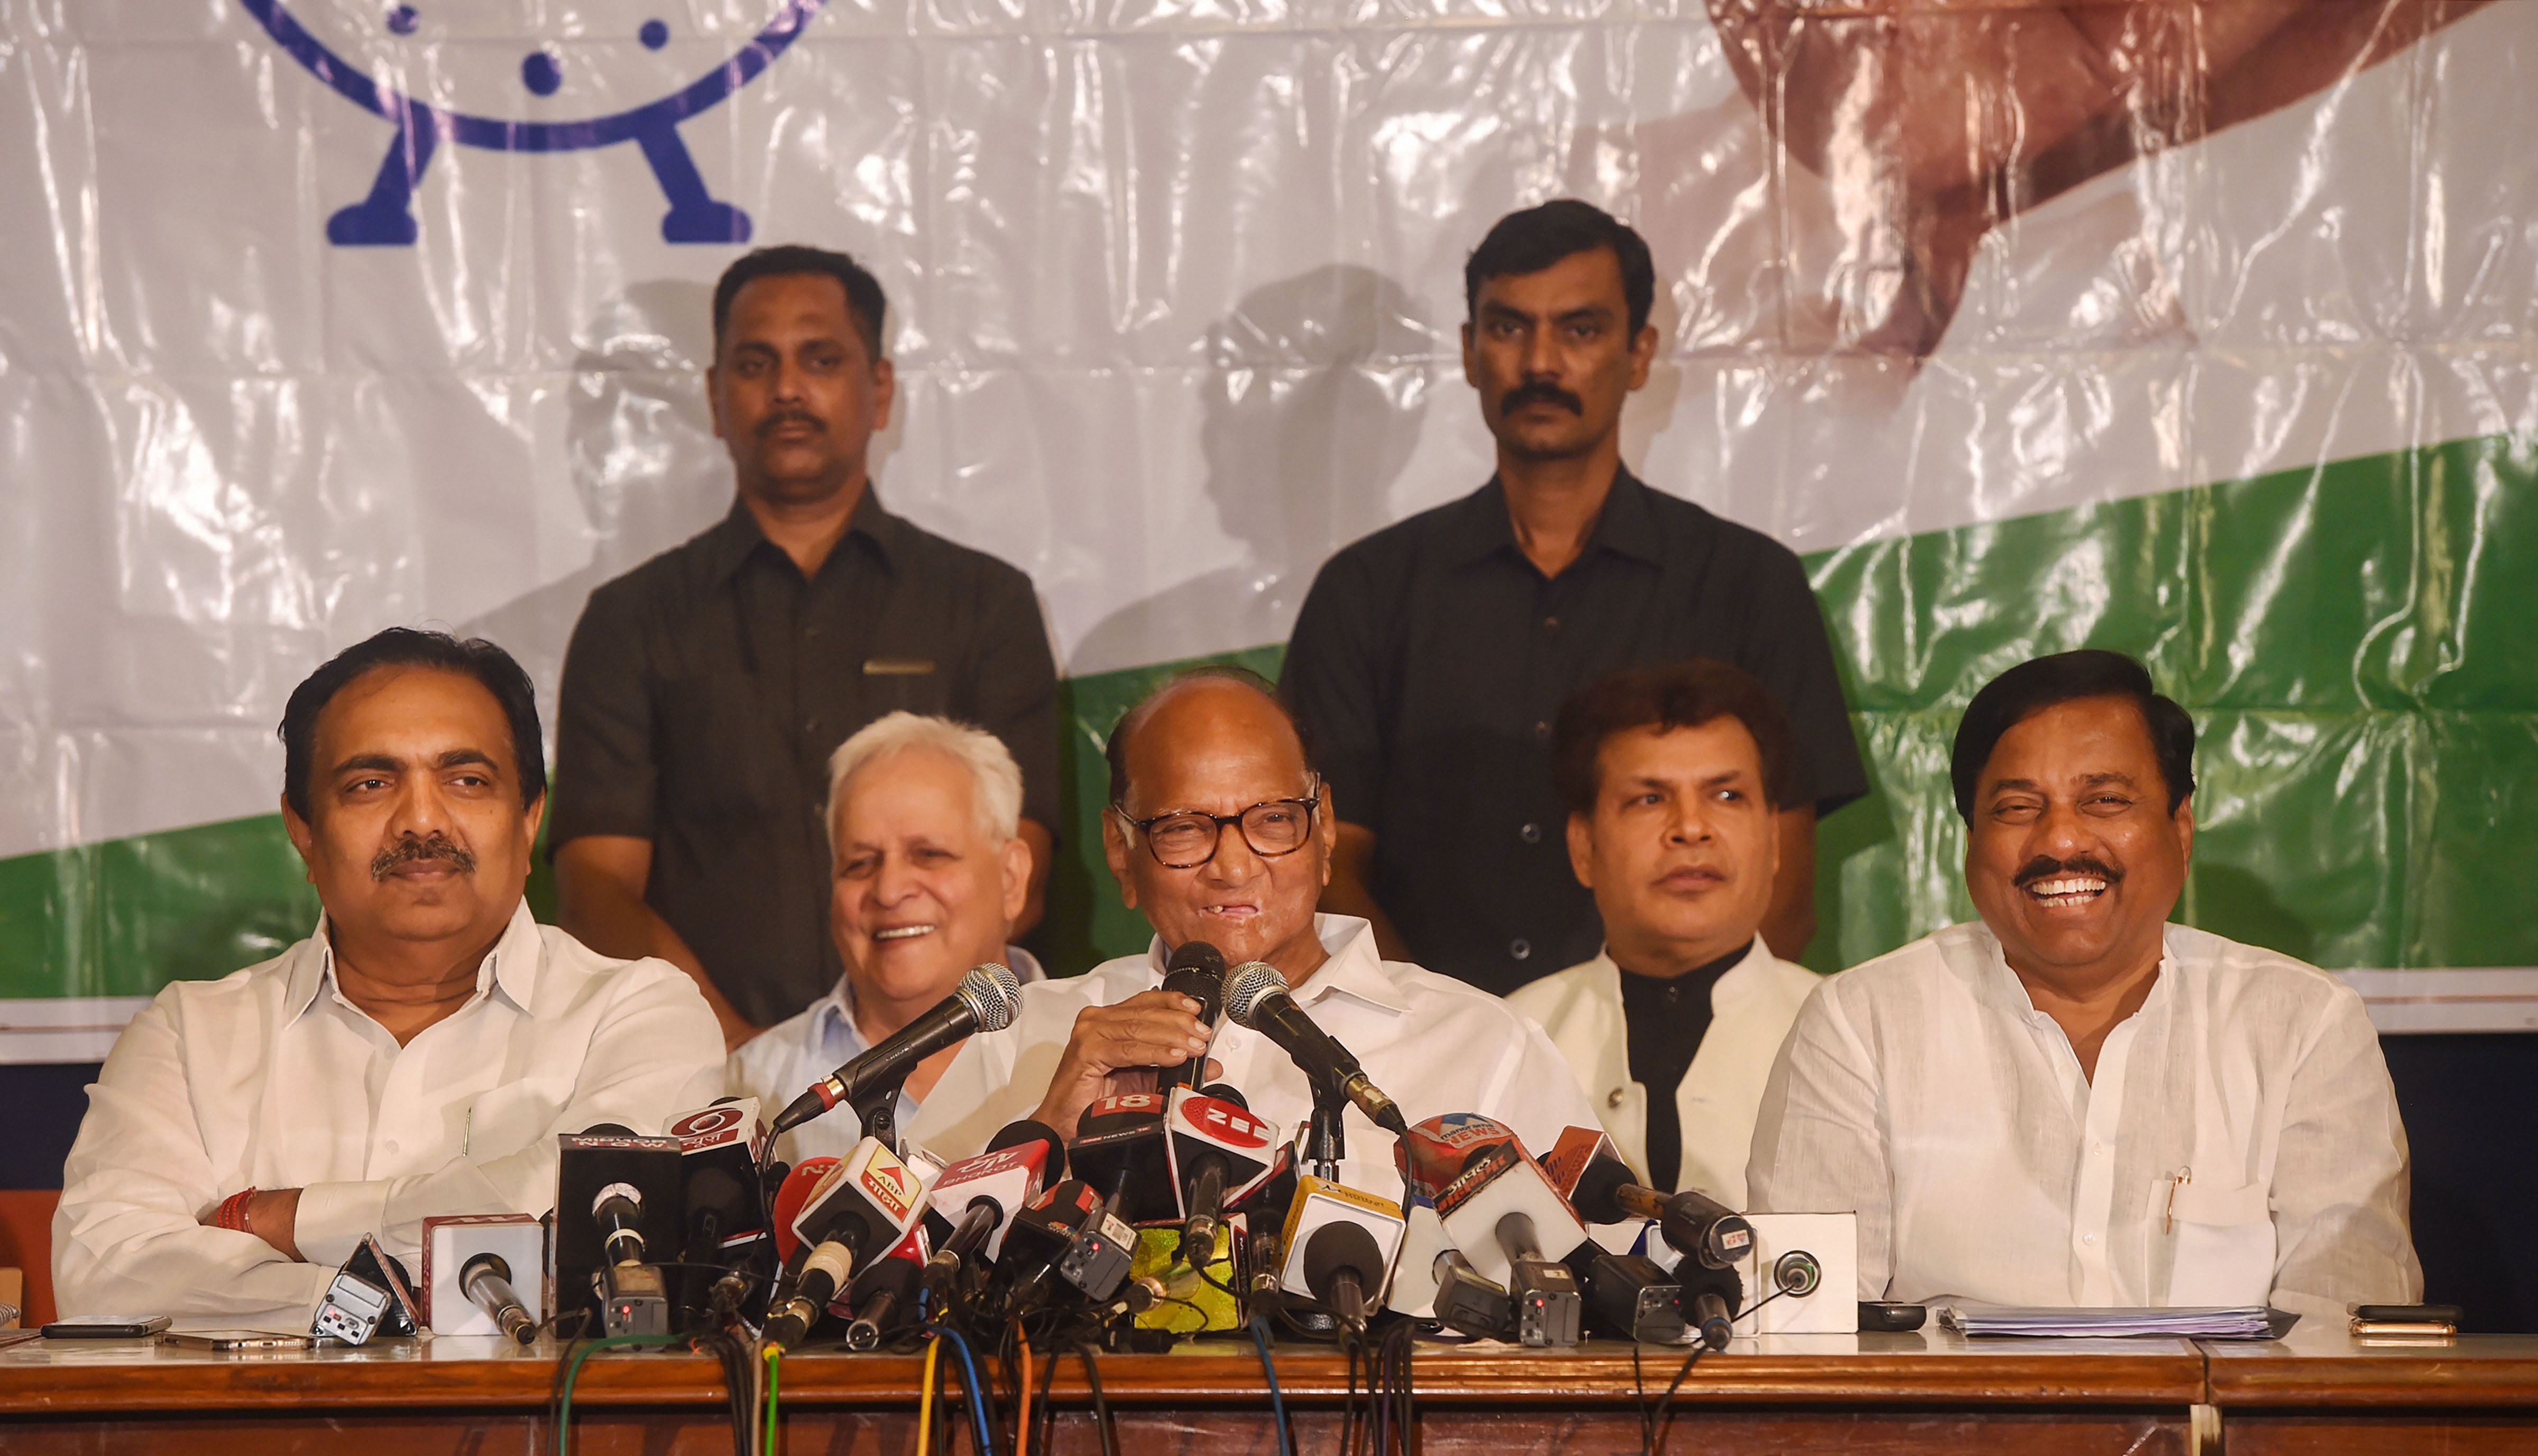 Nationalist Congress Party Chief Sharad Pawar along with party leaders Jayant Patil and Sunil Tatkare addresses a press conference - PTI